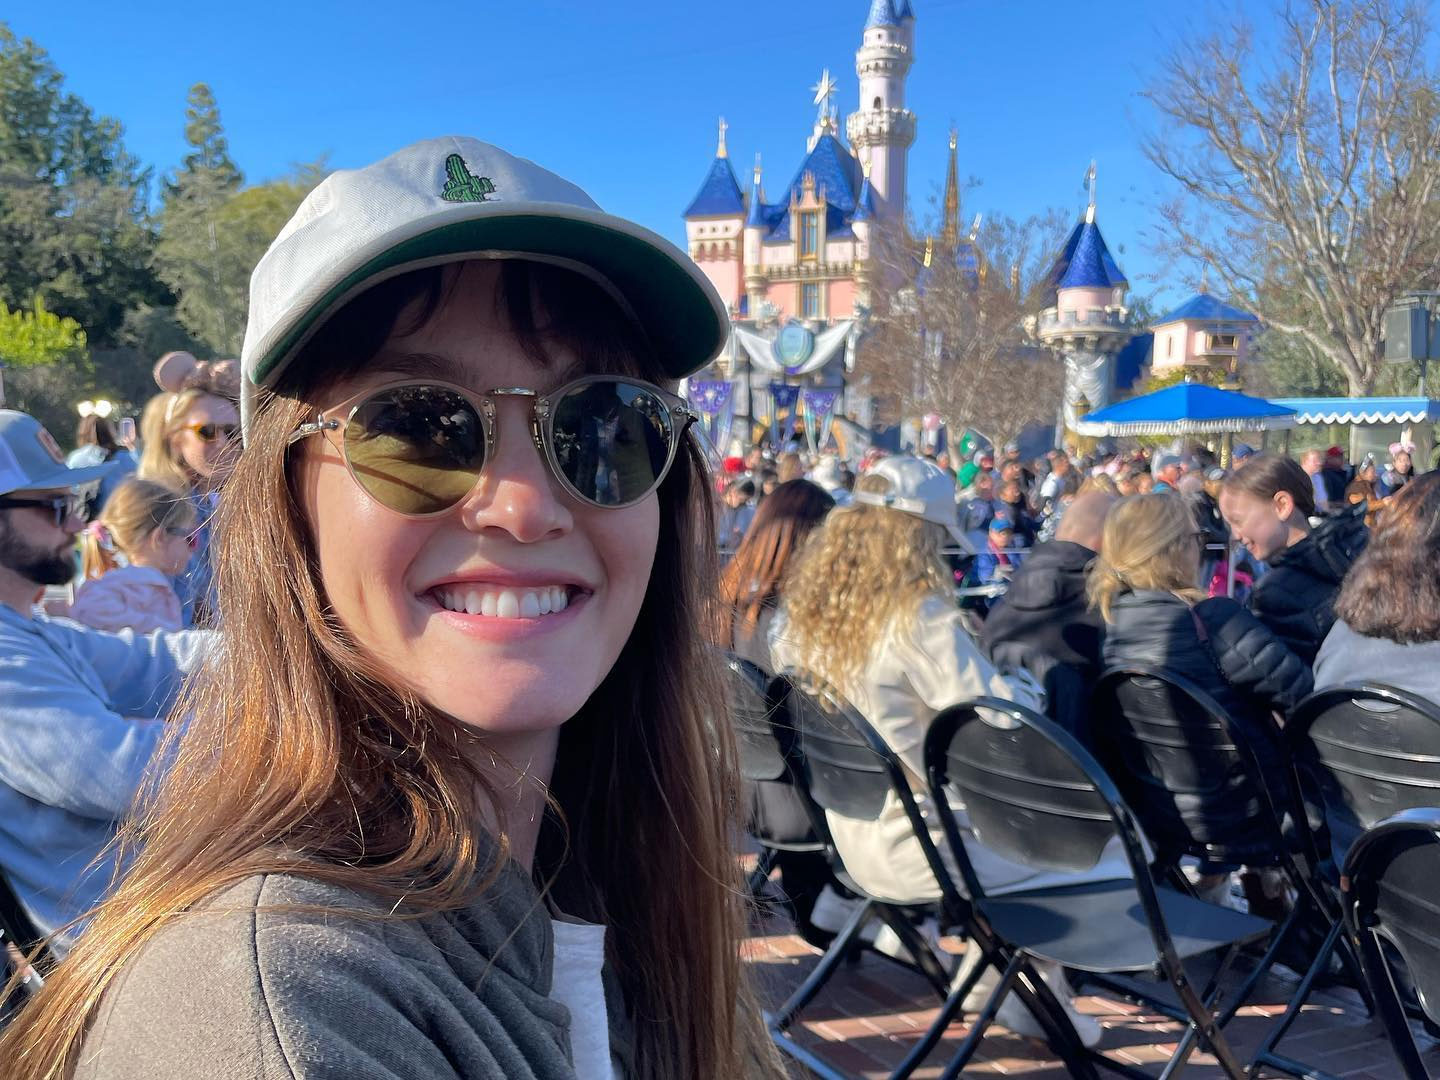 Disney fan visits all 12 Disney theme parks in 12 days, rides over